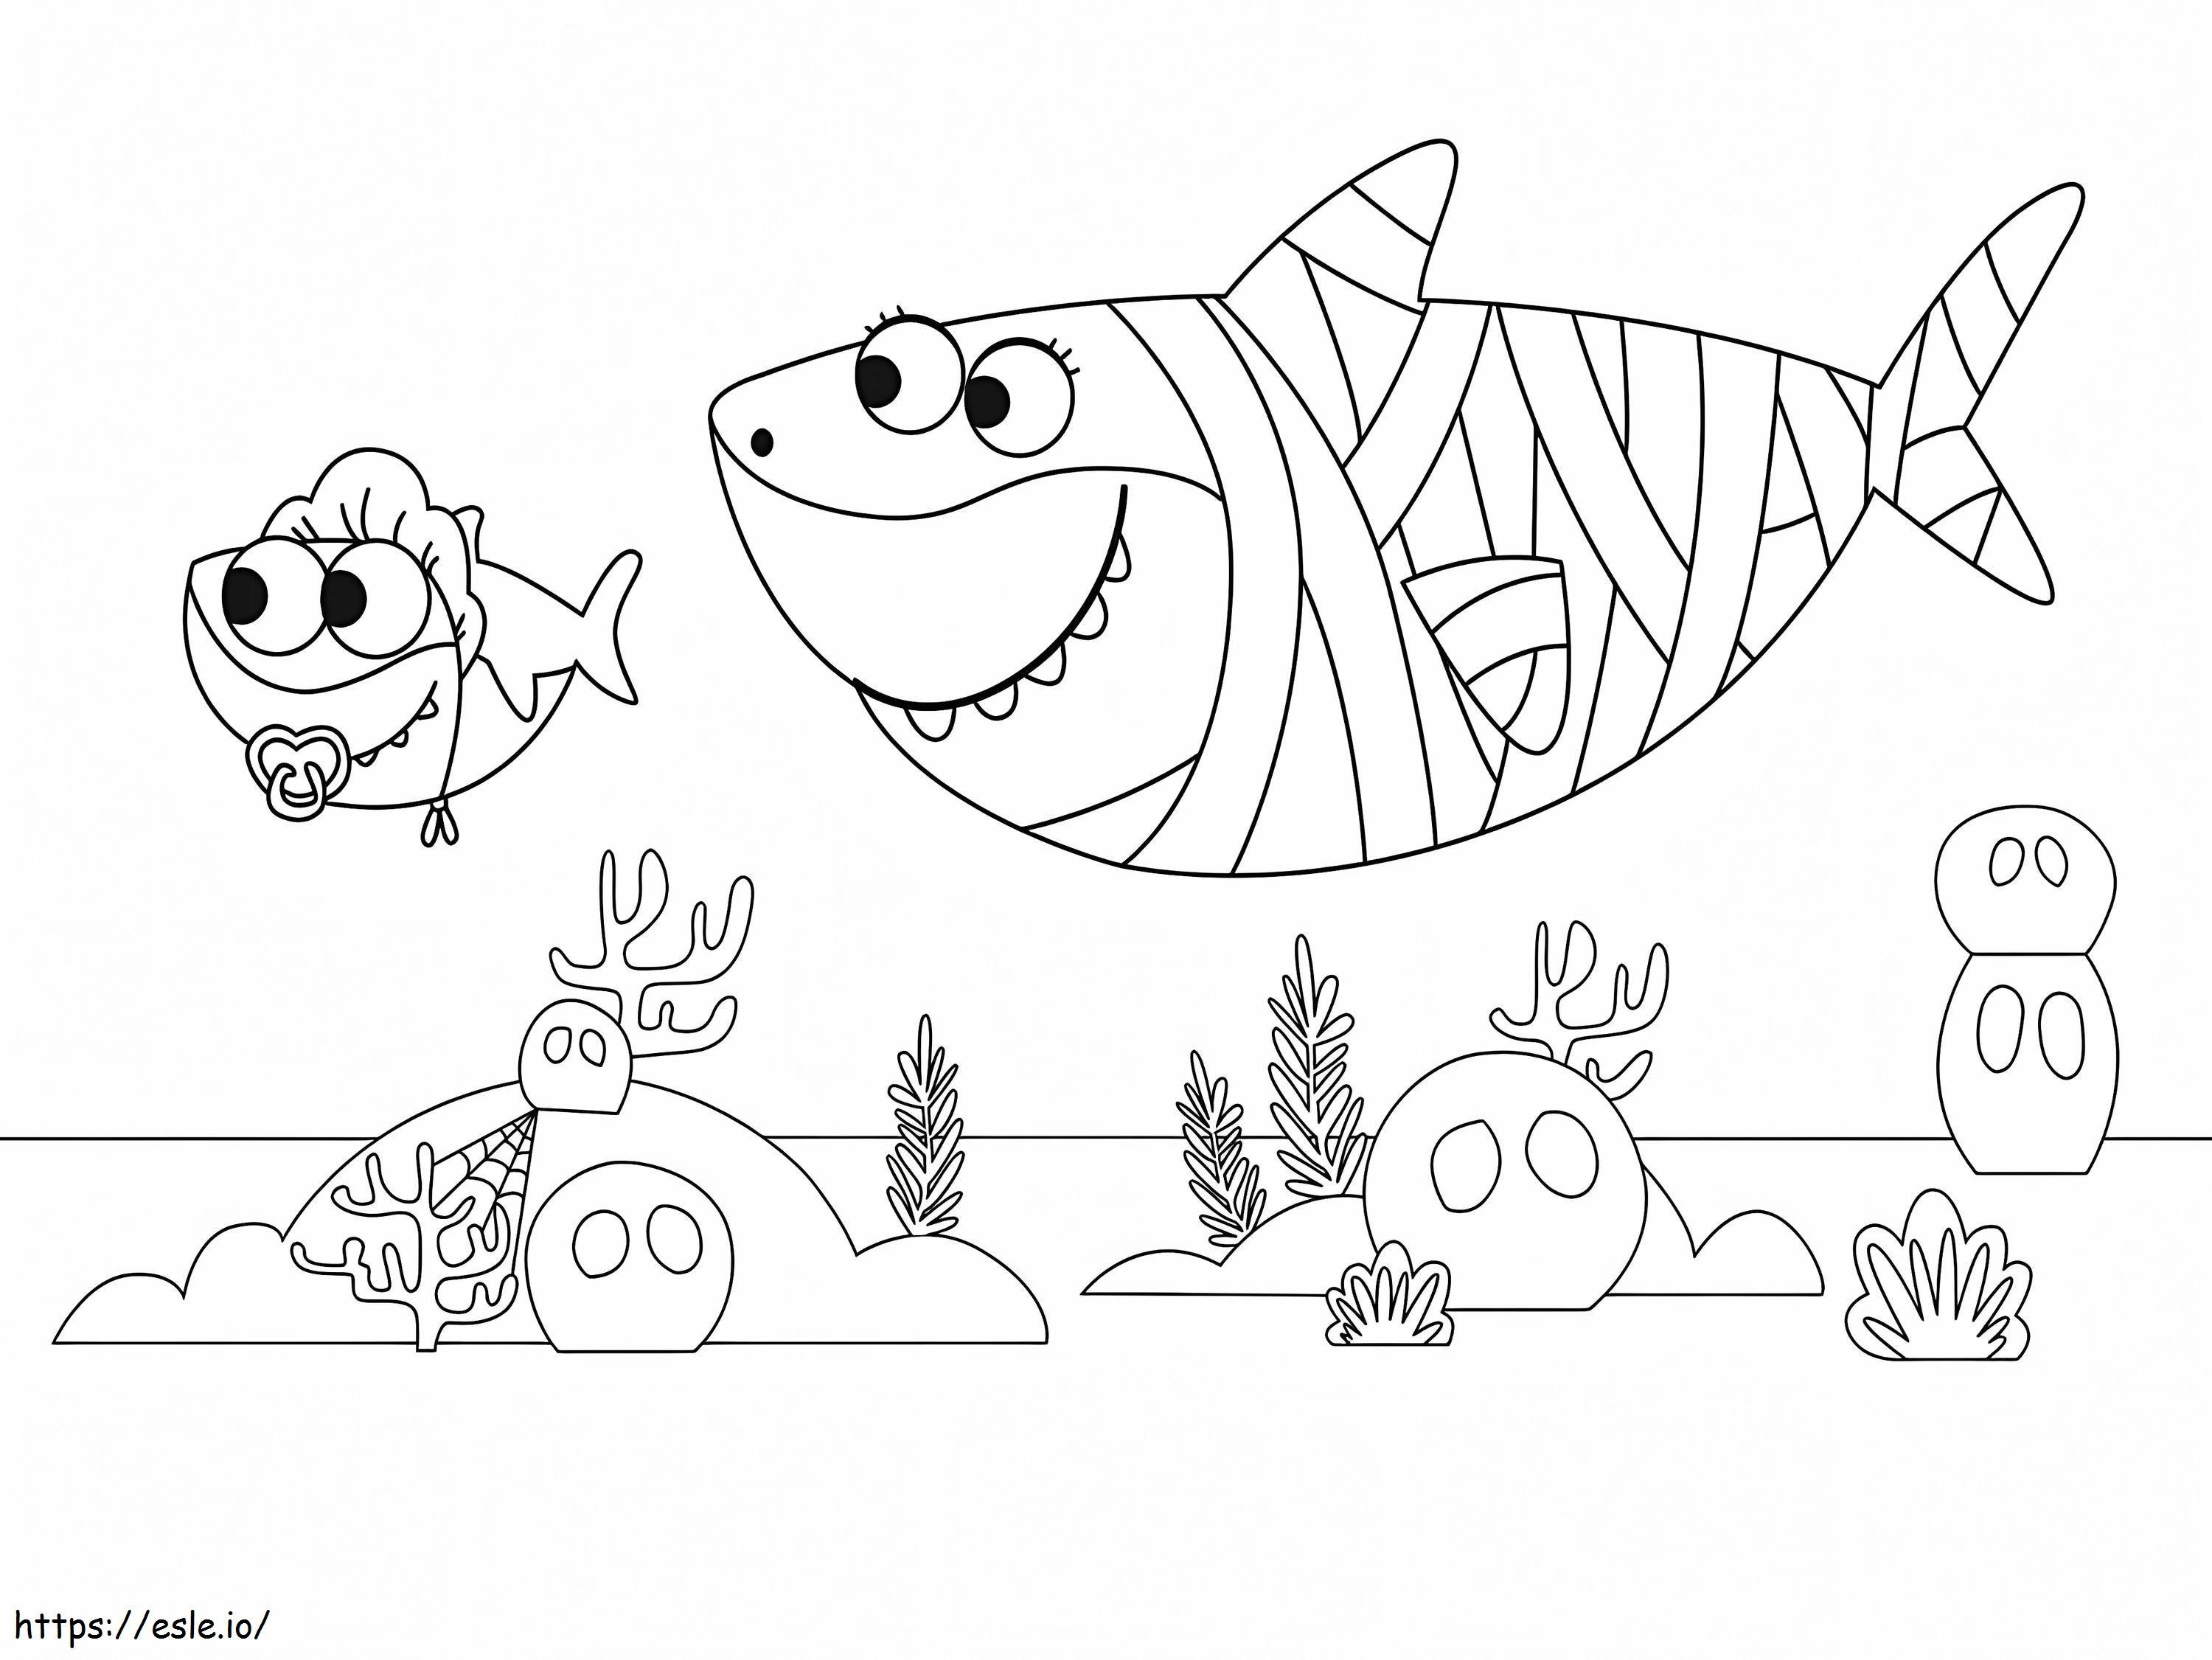 1583829634 Enqyij5 coloring page